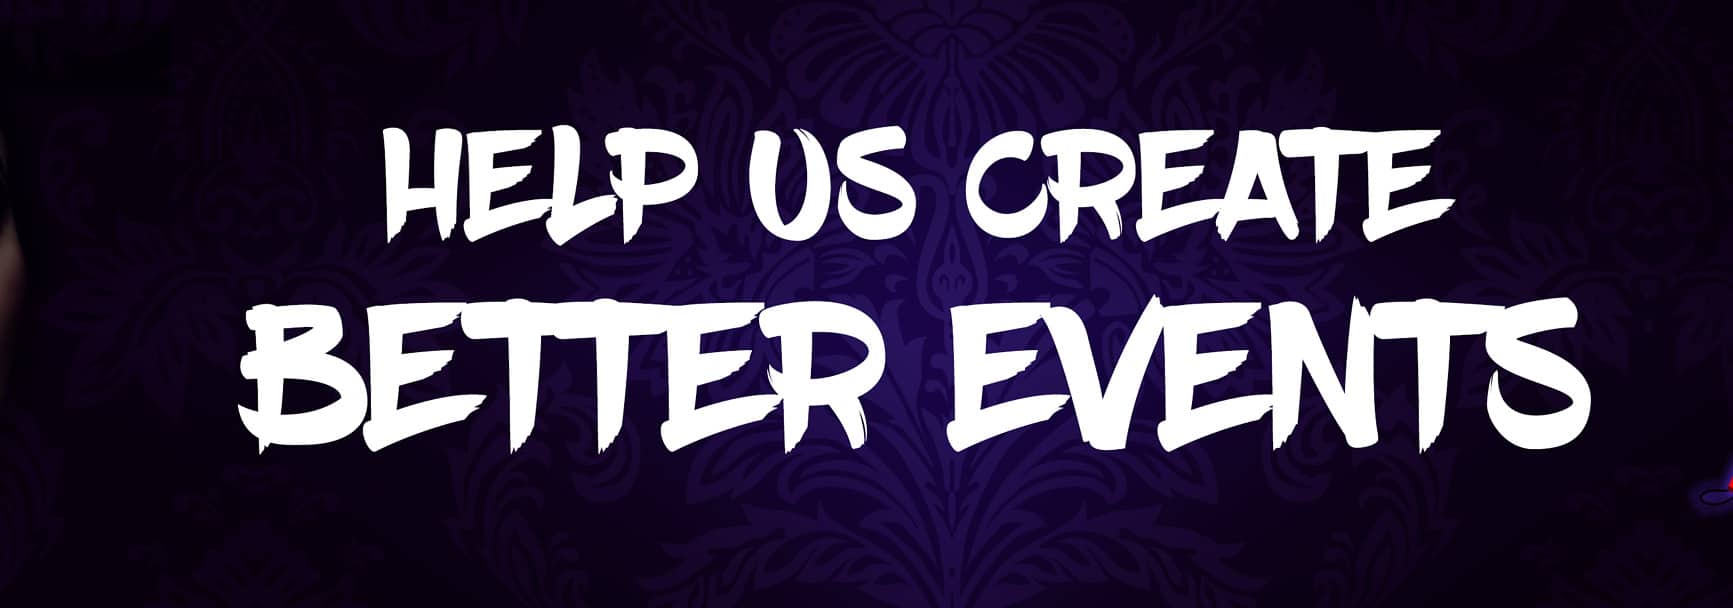 Help Us Create Better Events